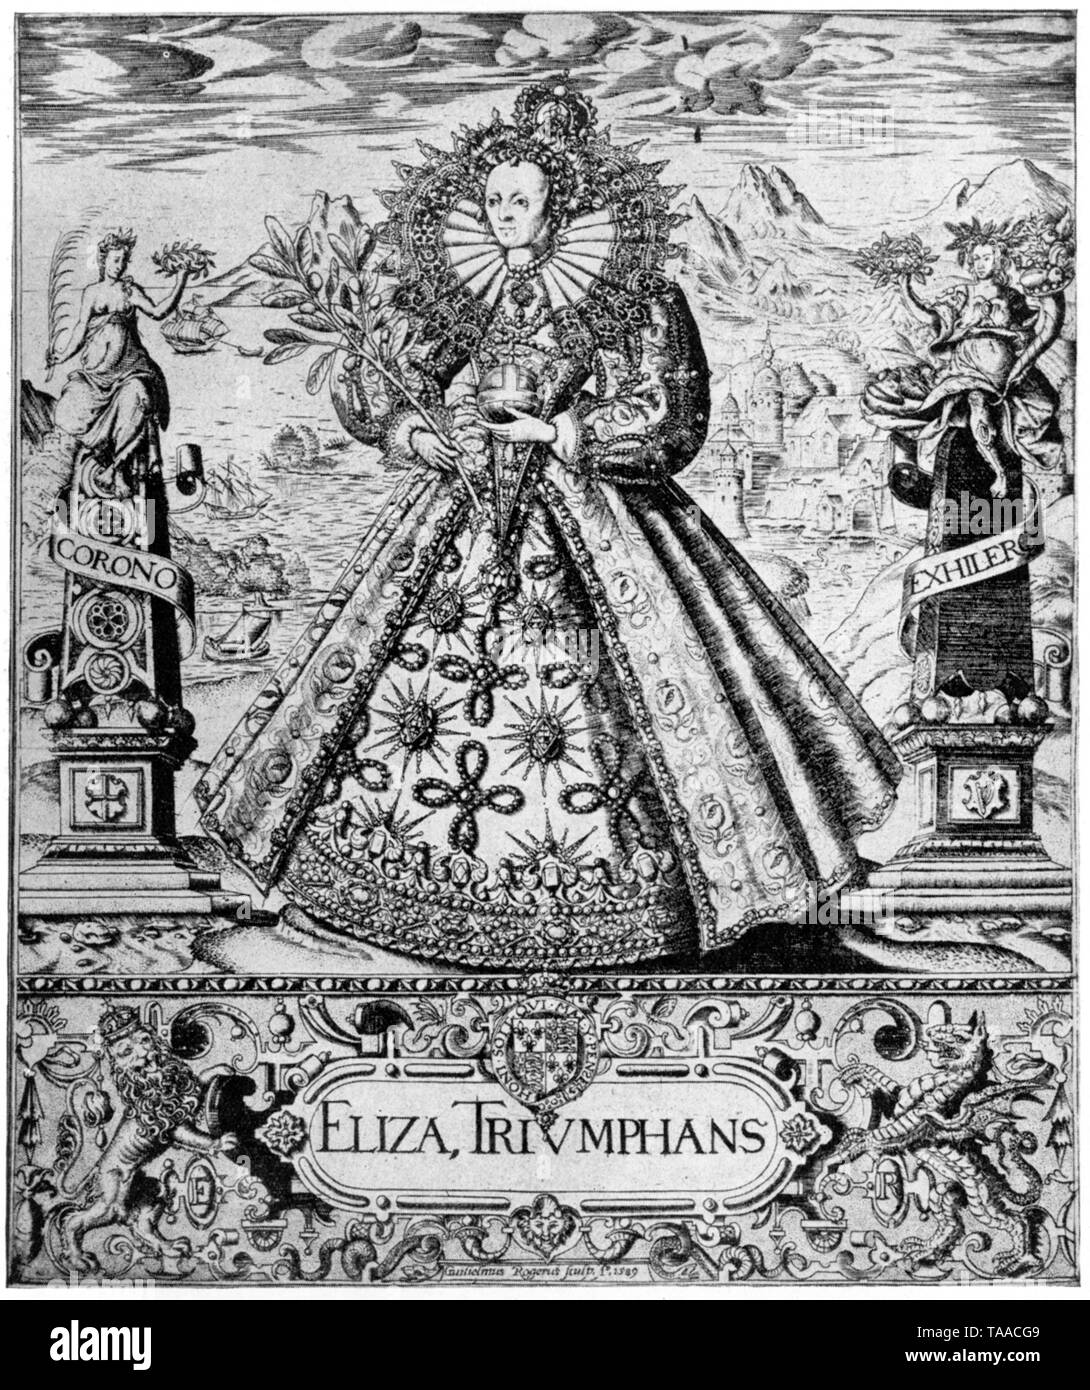 Elizabeth Triumphant (Eliza Triumphans), c1589. By William Rogers (c1545-c1604). This early copper-plate engraving celebrates Elizabeth I's victory over the Spanish Armada. She stands triumphant surrounded by emblems of victory and peace, in front of a seascape symbolising British dominence of the sea. Stock Photo